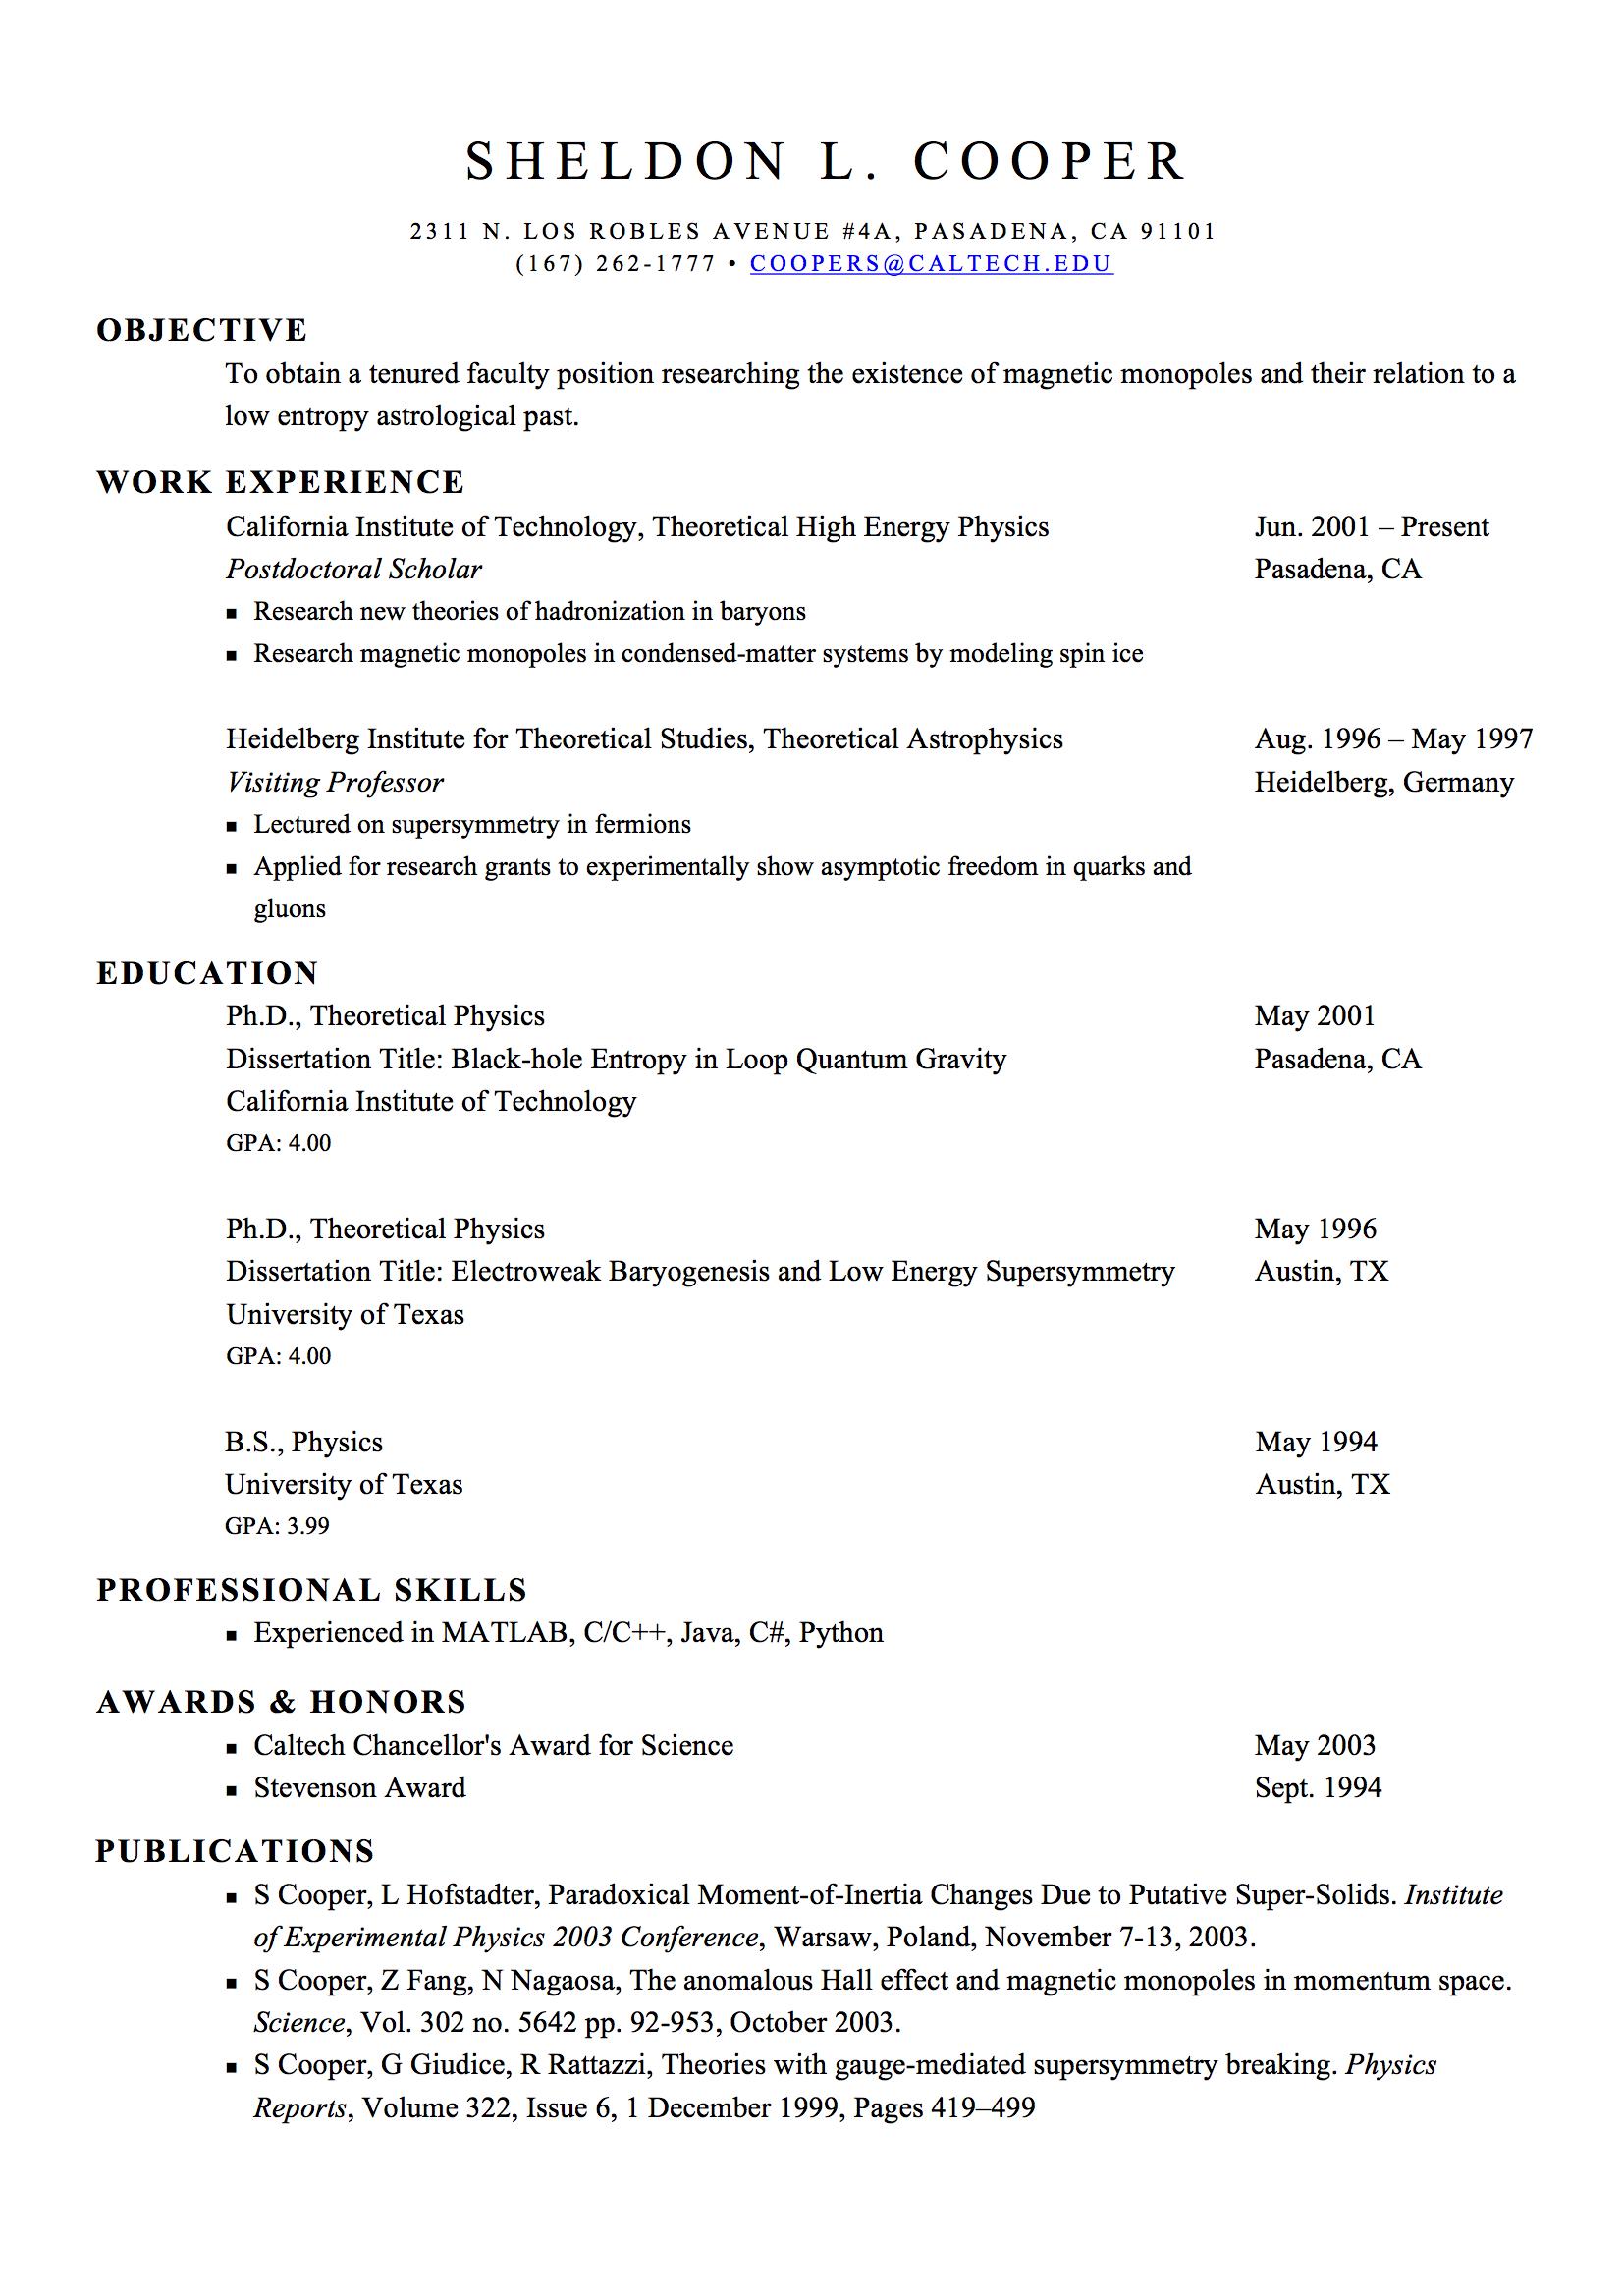 Practice Resume Forms Printable For Esl Students - Printable Forms Free ...